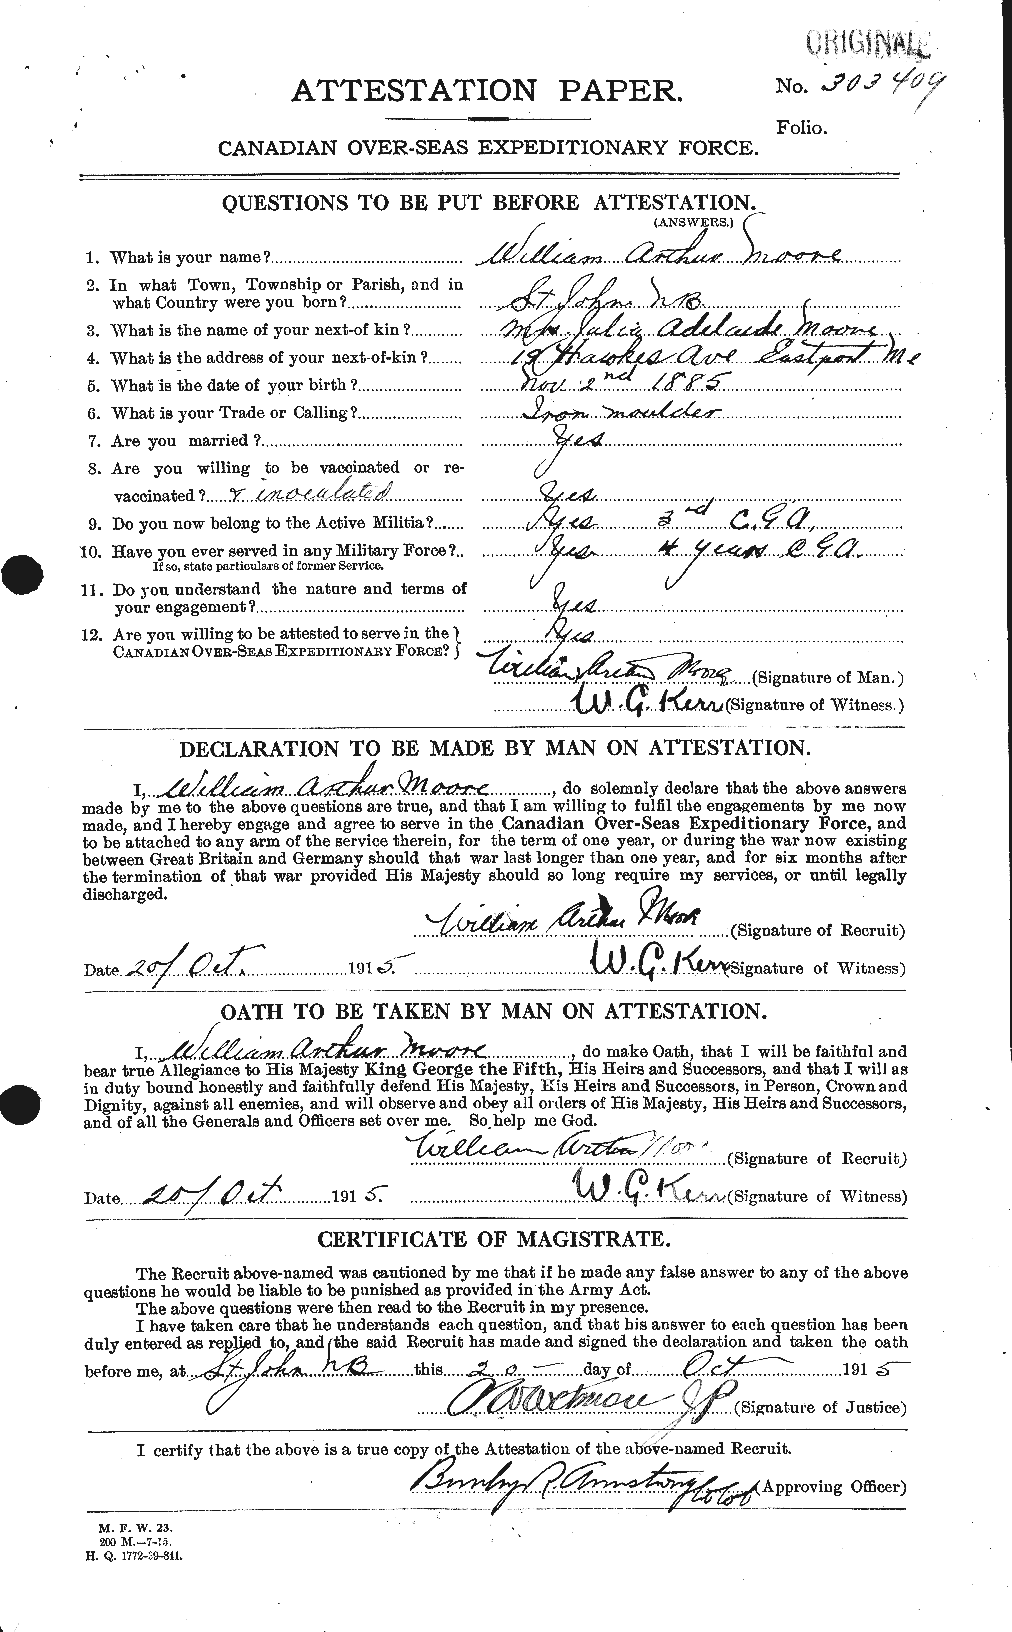 Personnel Records of the First World War - CEF 505775a